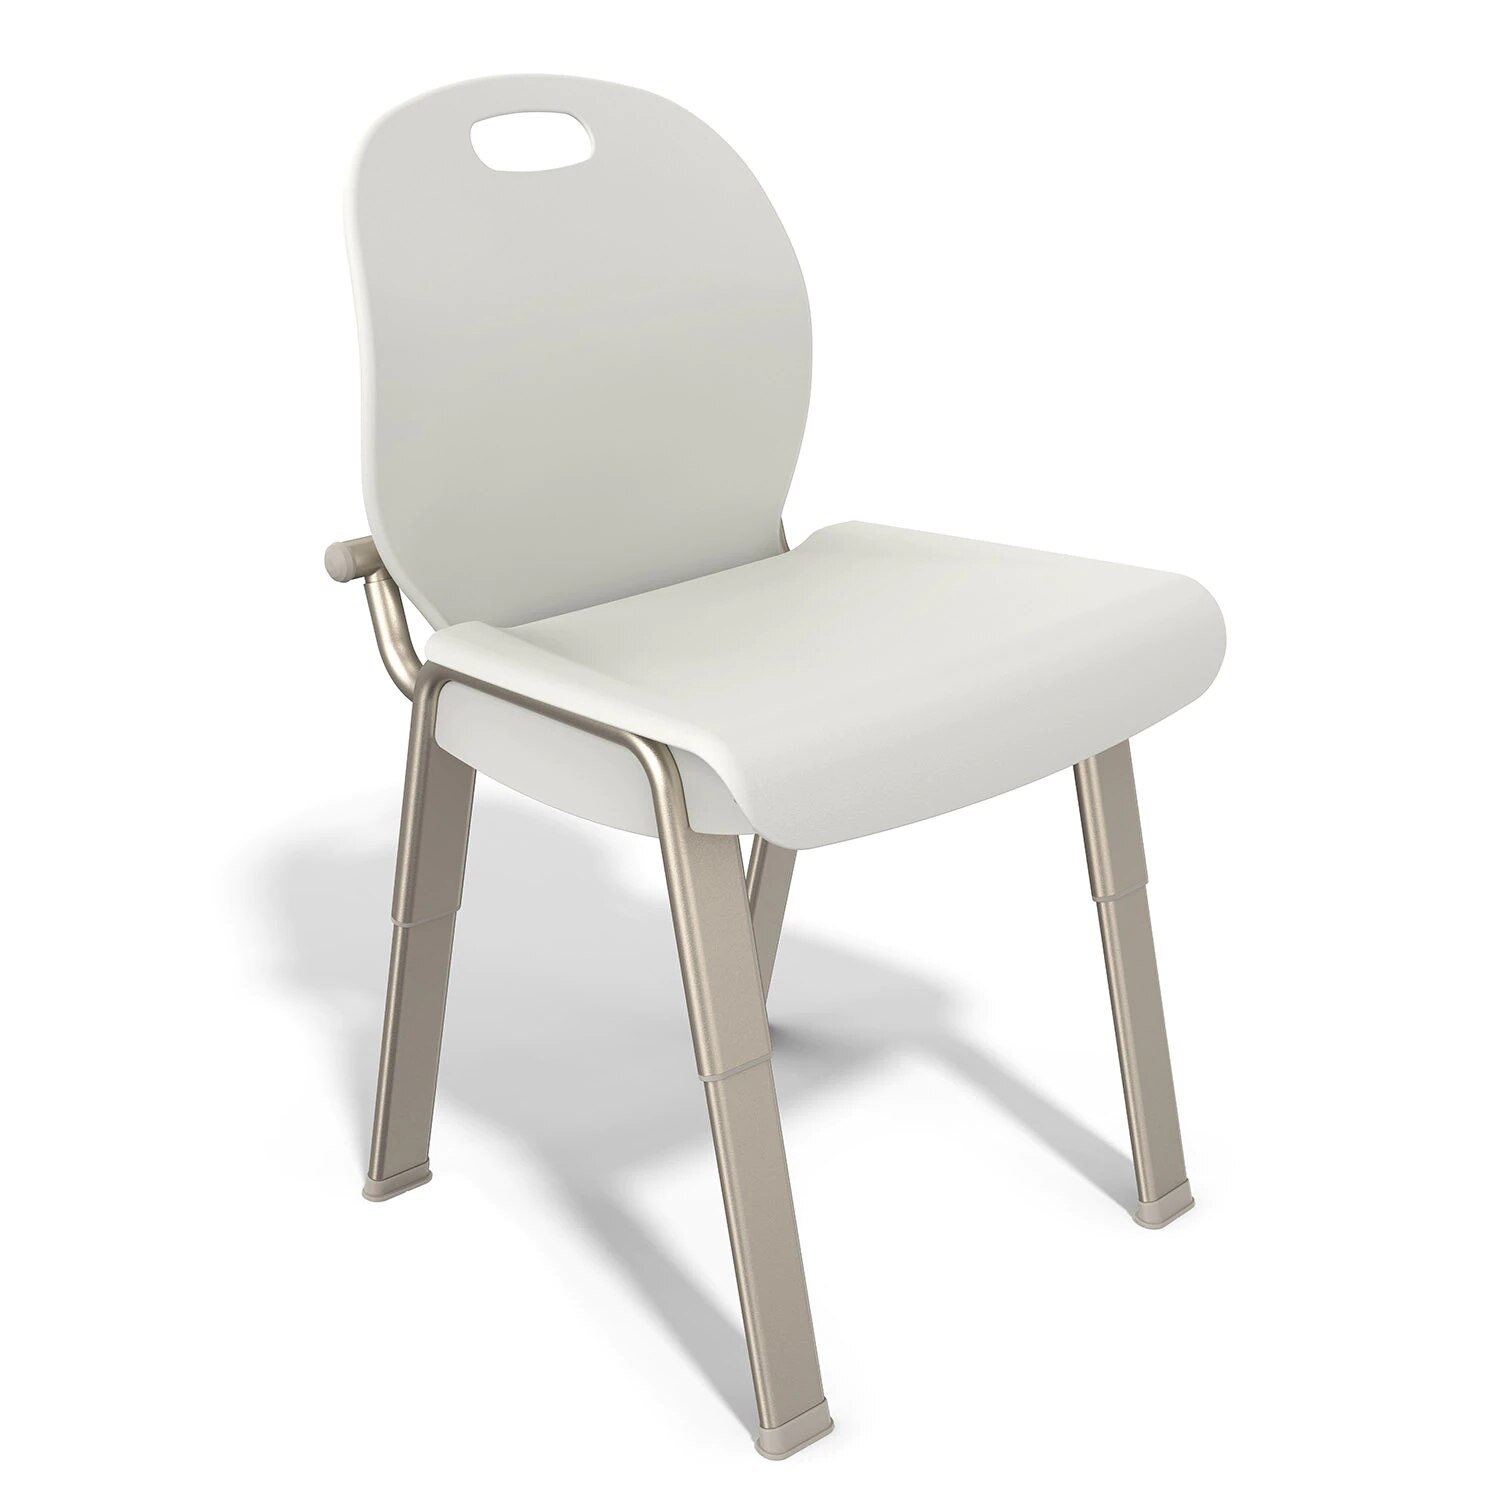 CVS Health Convertible Shower Chair and Stool by Michael Graves Design